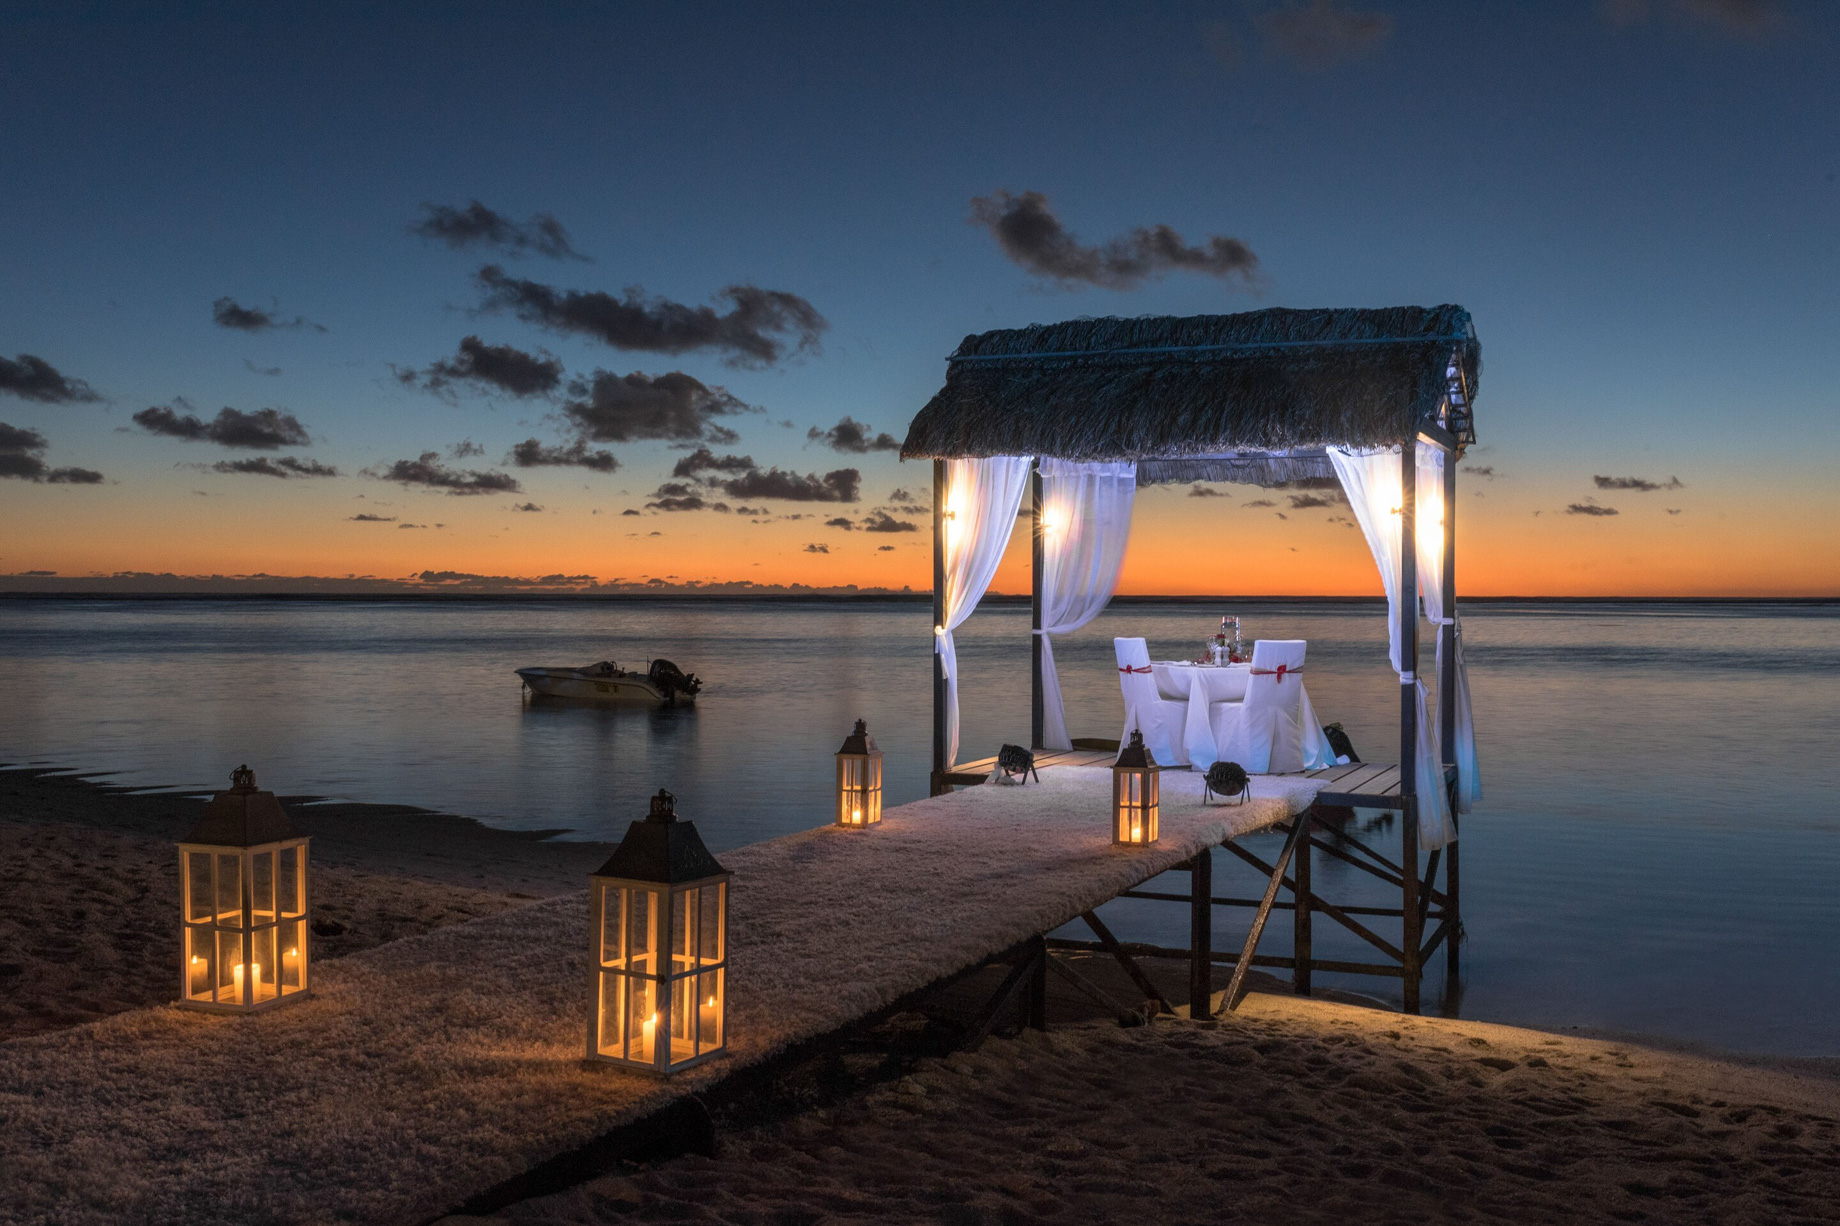 JW Marriott Mauritius Resort – Mauritius – The Jetty Private Dining at Night